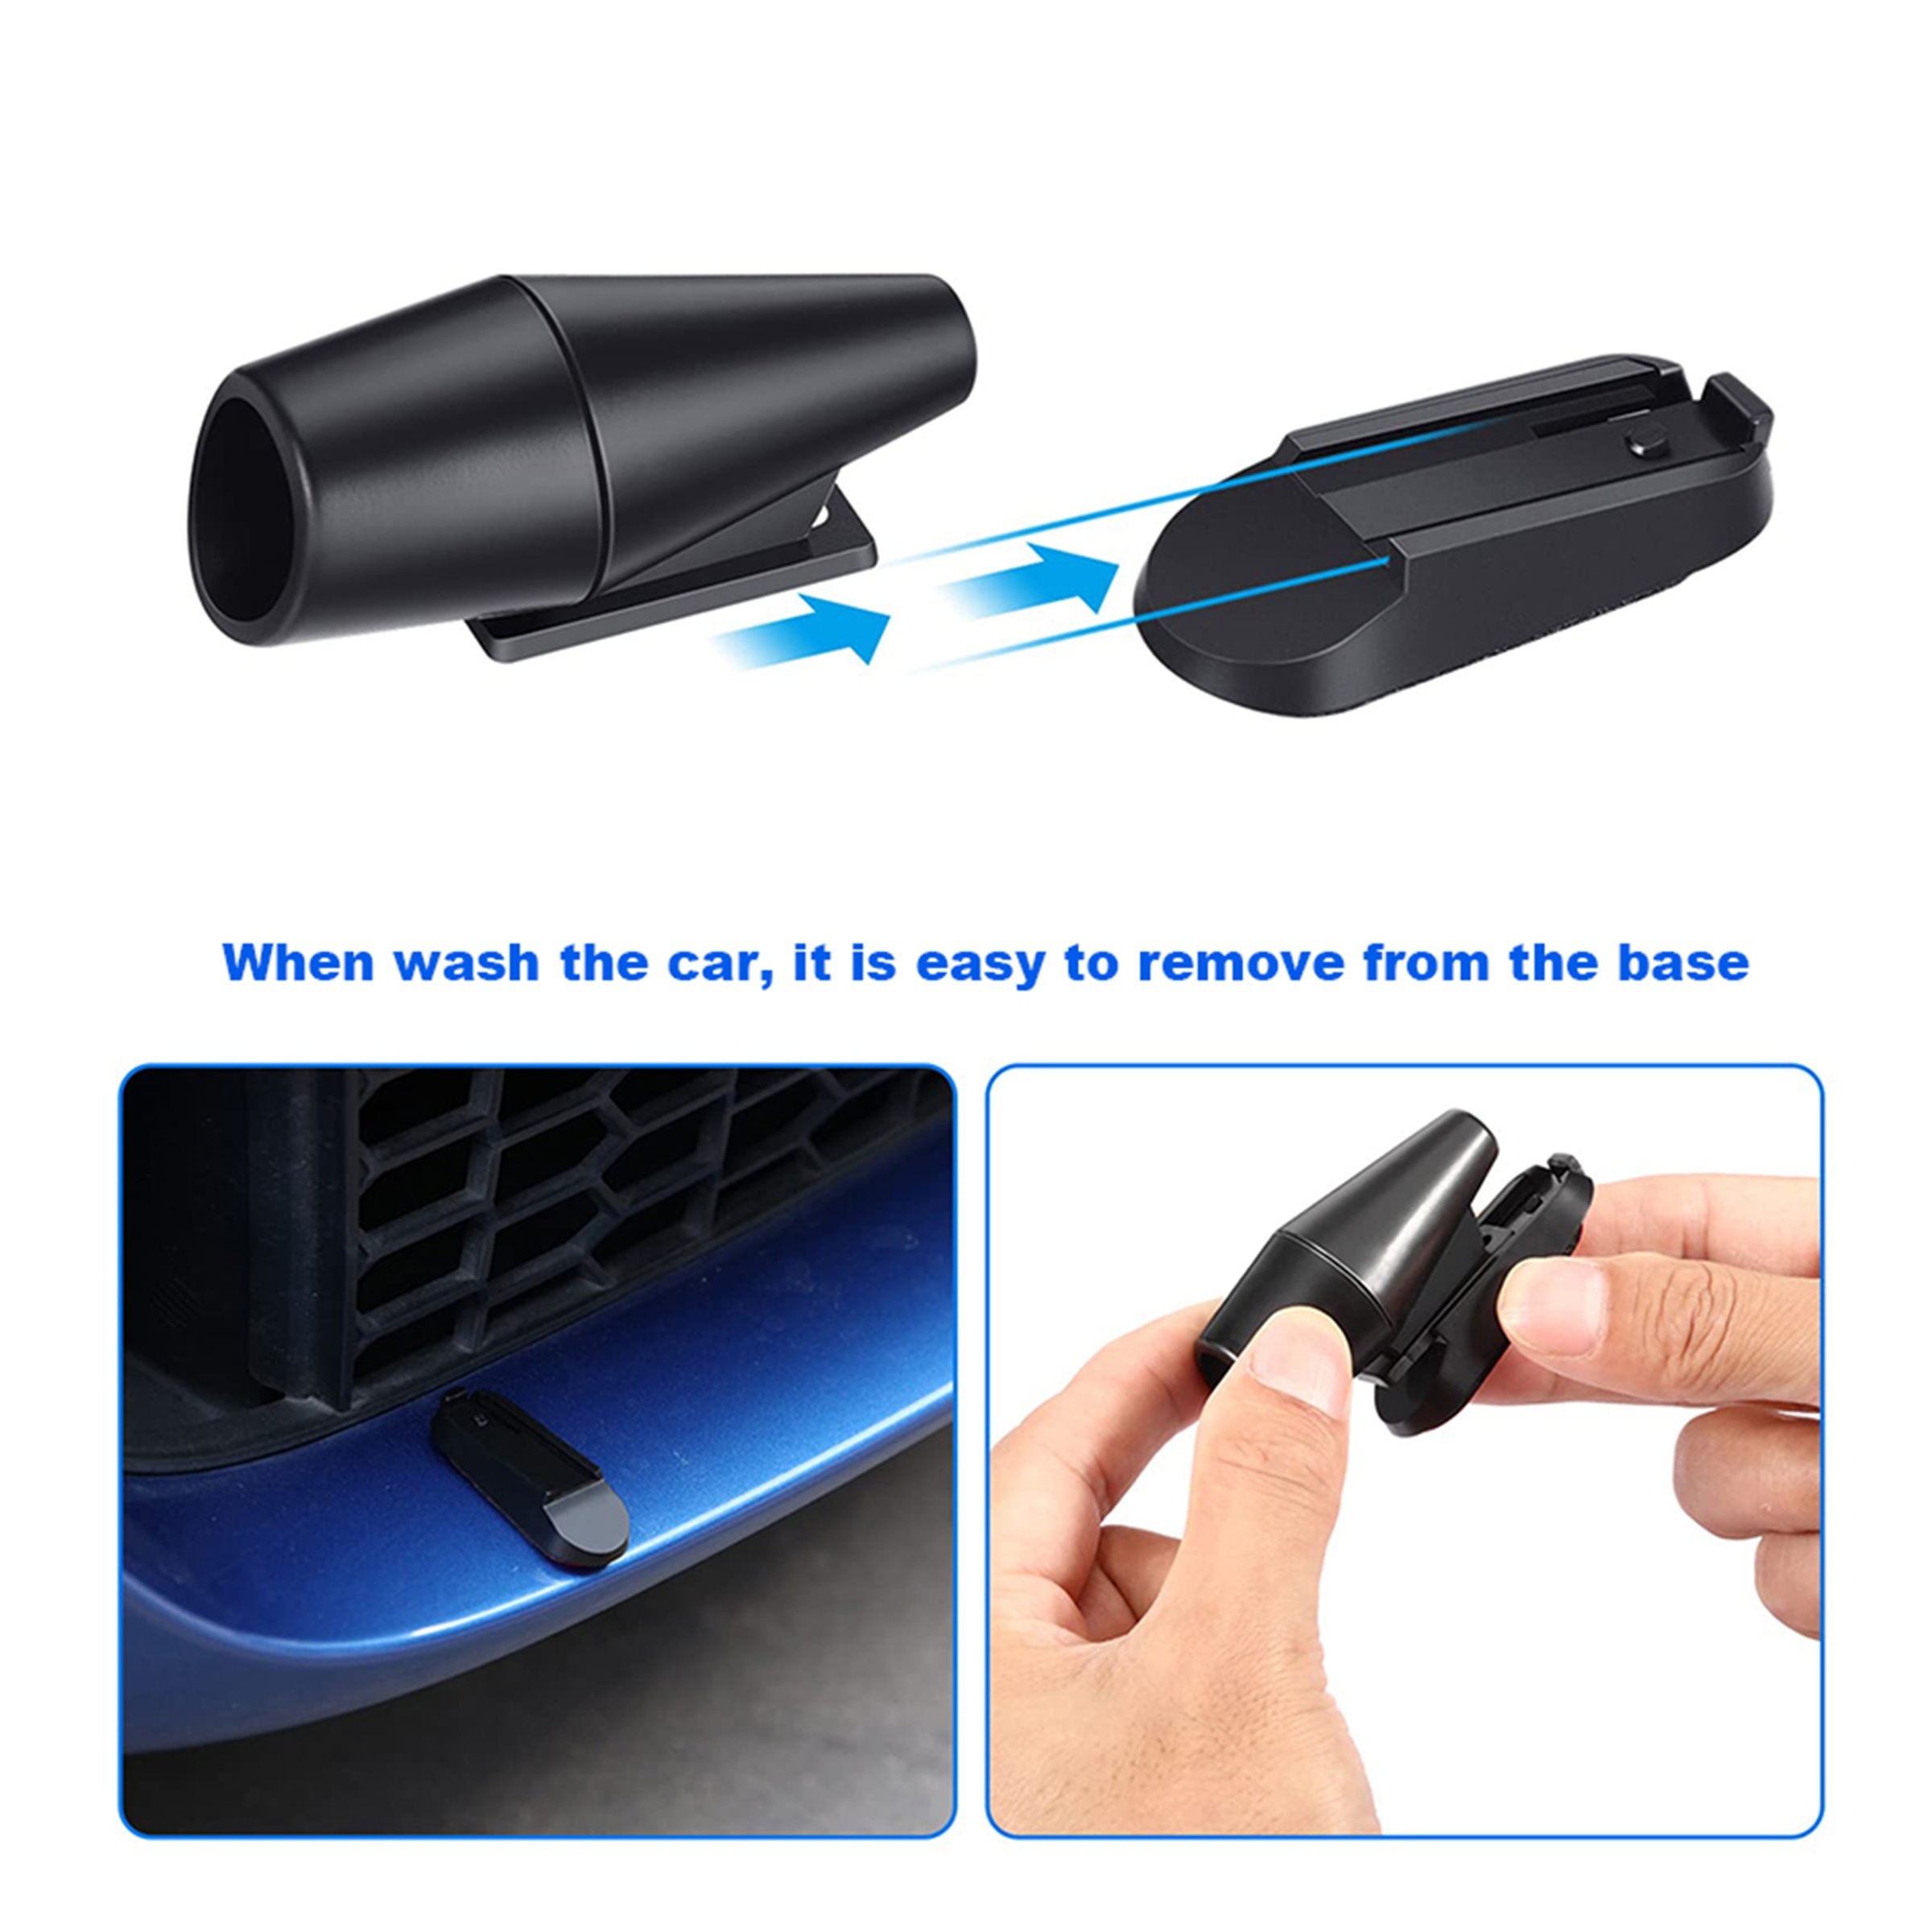 6pcs Deer Whistle Car Necessities Auto Deer Whistles Deer Horn for Car Deer  Horns for Vehicles Sports Whistle Deer Repellent Devices for Car Deer  Whistles for Vehicles Car Parts 